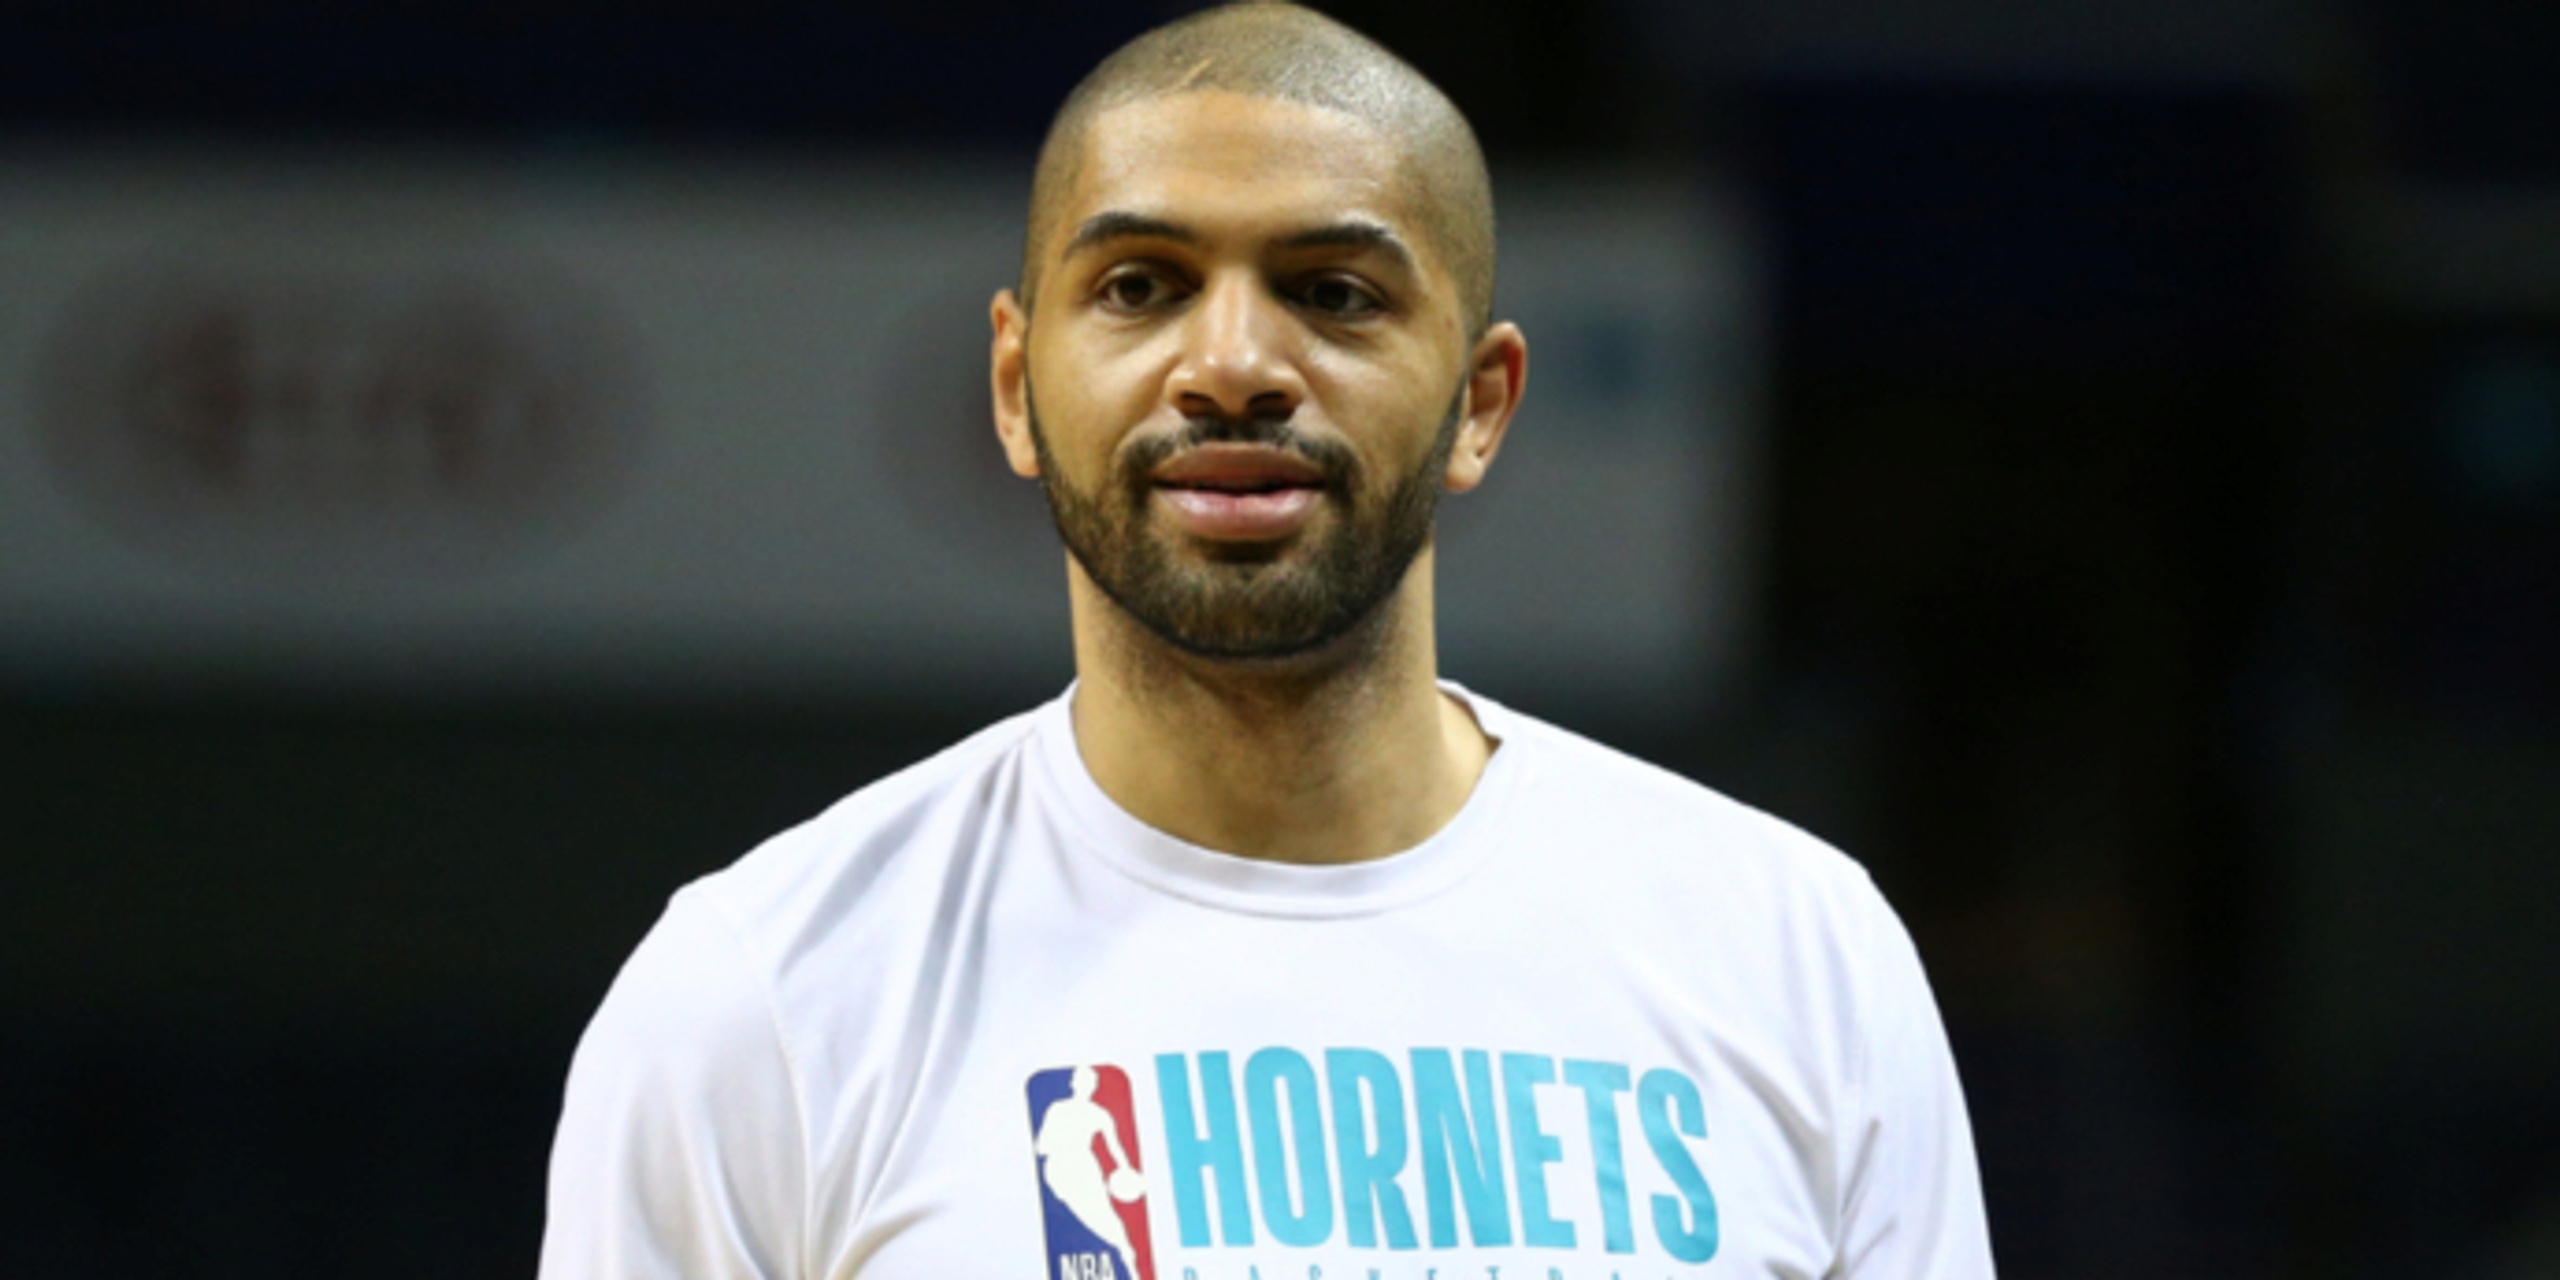 Hornets will waive Nic Batum to make room for Hayward signing